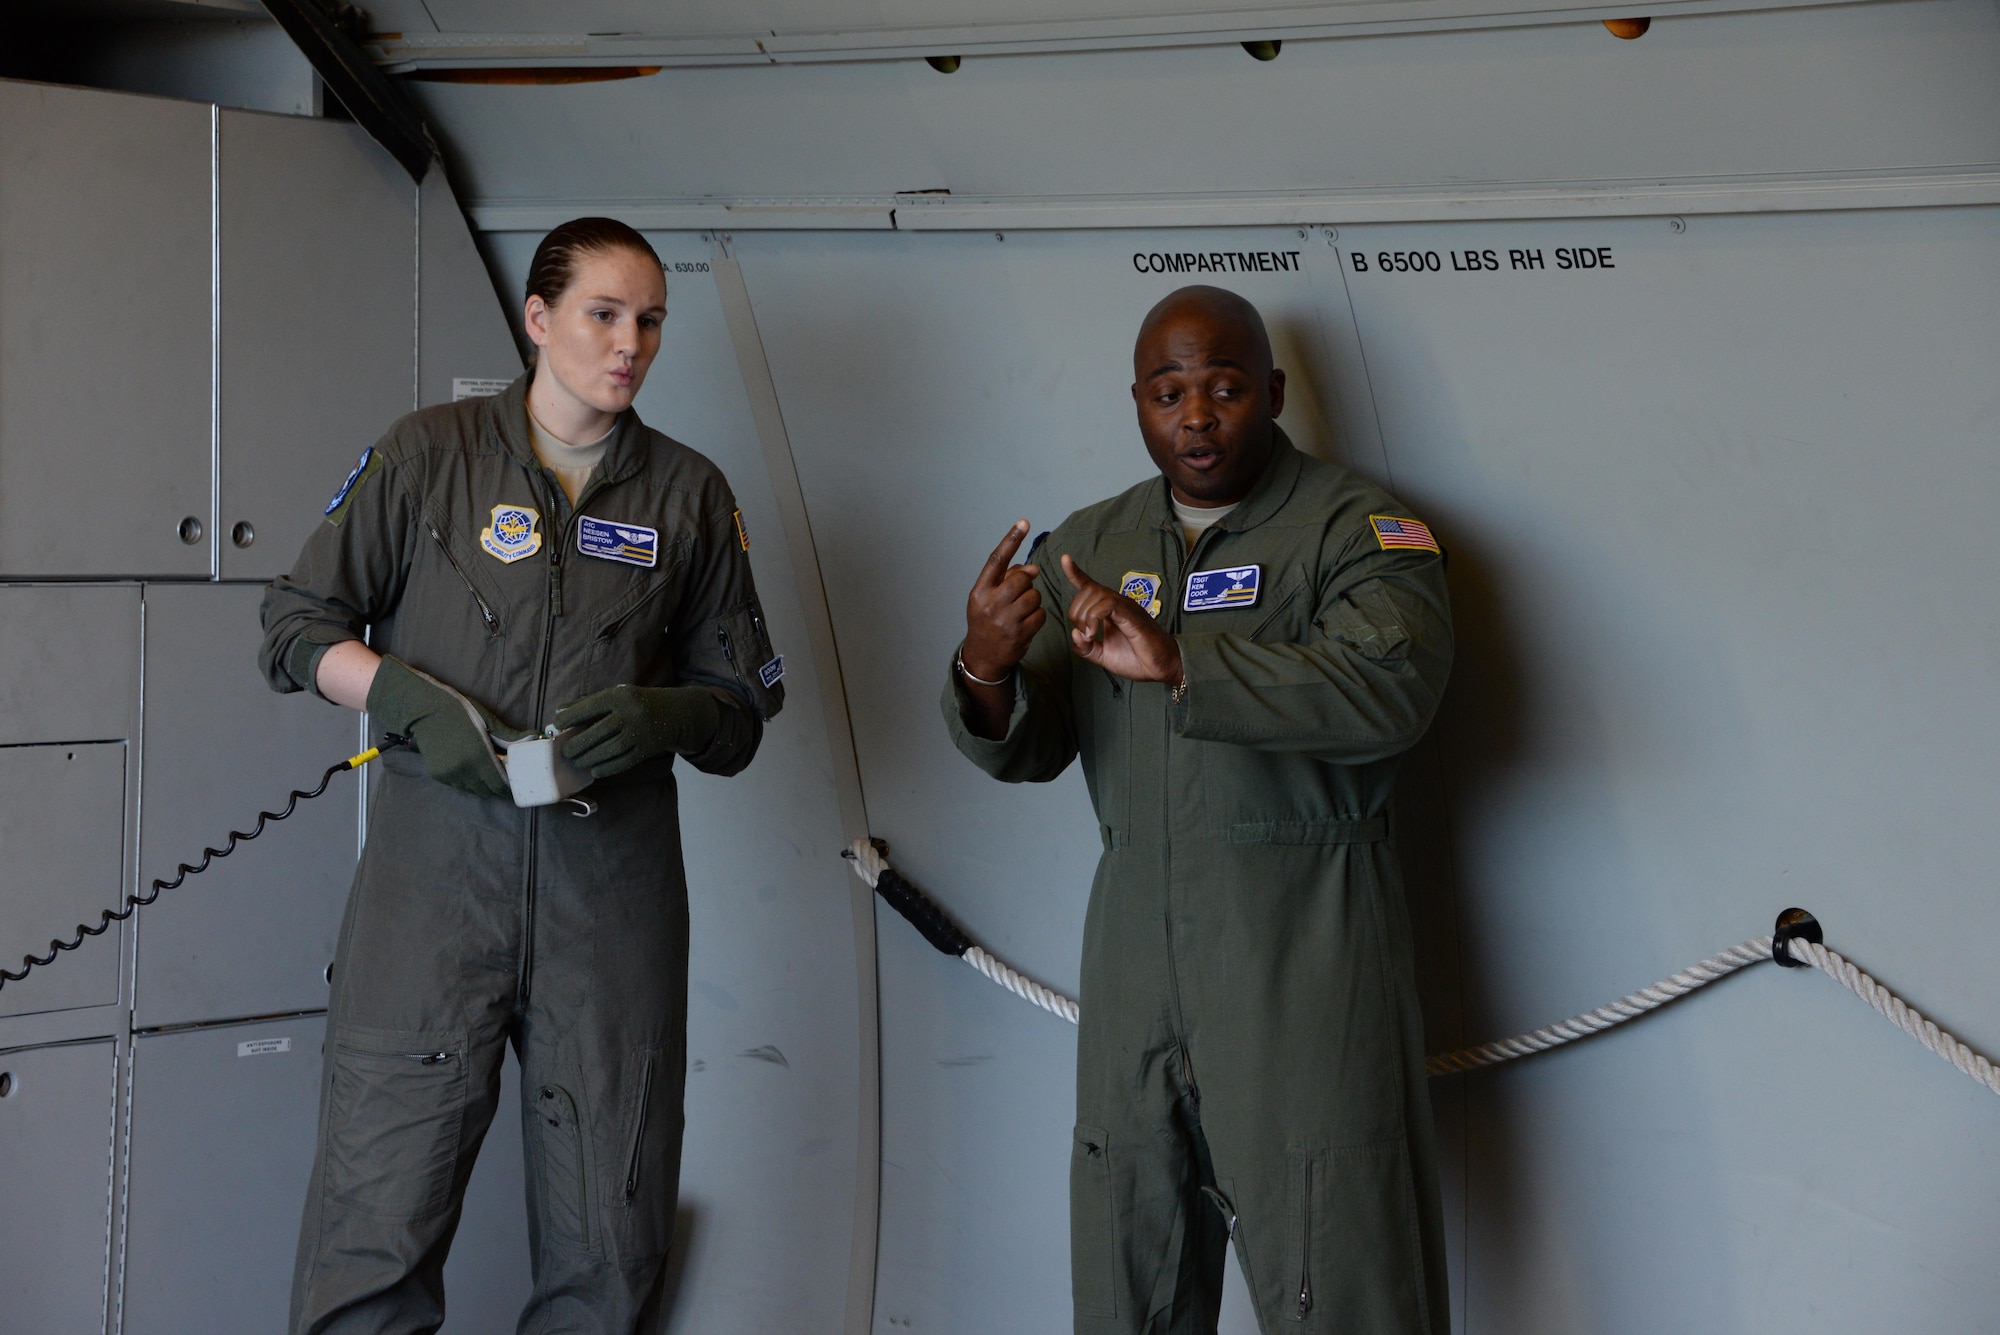 Airman 1st Class Neesen Bristow (Left), 6th Air Refueling Squadron, listens to Tech. Sgt. Kenneth Cook (Right), 6th ARS, provide instruction on KC-10 Extender loading operations at Travis Air Force Base, Calif., June 17, 2017. Cook oversaw the loading of more than 15,000 pounds of cargo prior to a flight to Joint Base Pearl Harbor-Hickam, Hawaii. (U.S. Air Force photo by Tech. Sgt. James Hodgman)